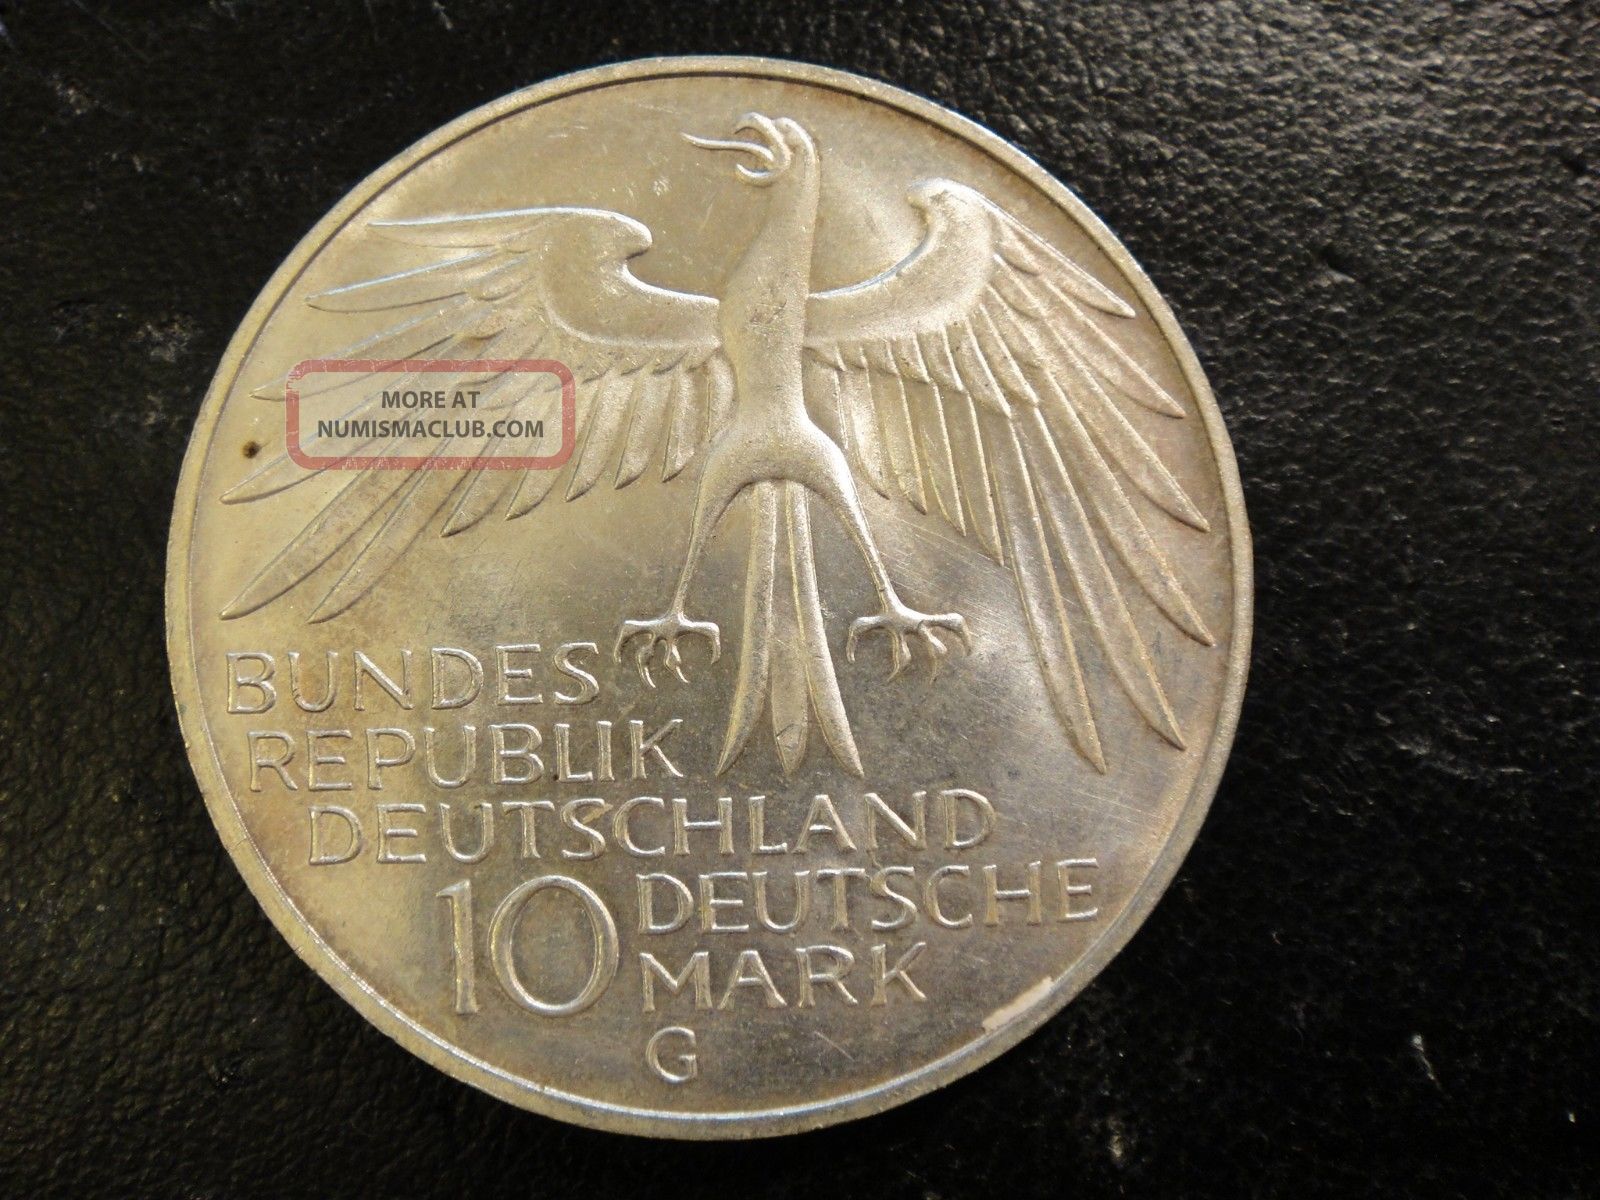 Pair 2 1972 Germany Silver Ten Marks Munich Olympics Uncirculated